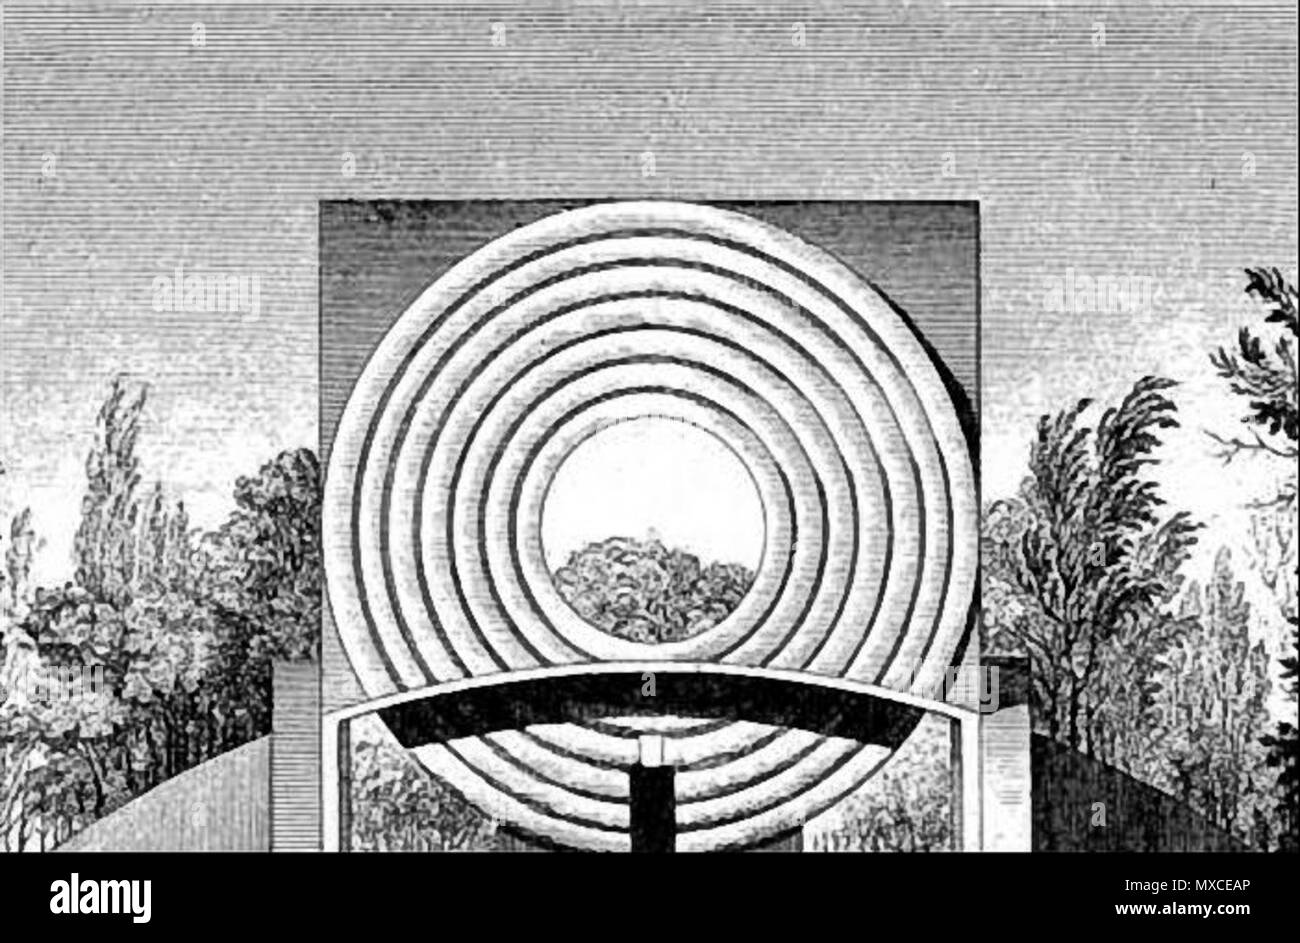 . Claude-Nicolas Ledoux: 'House of Circles', Project for an artists ...